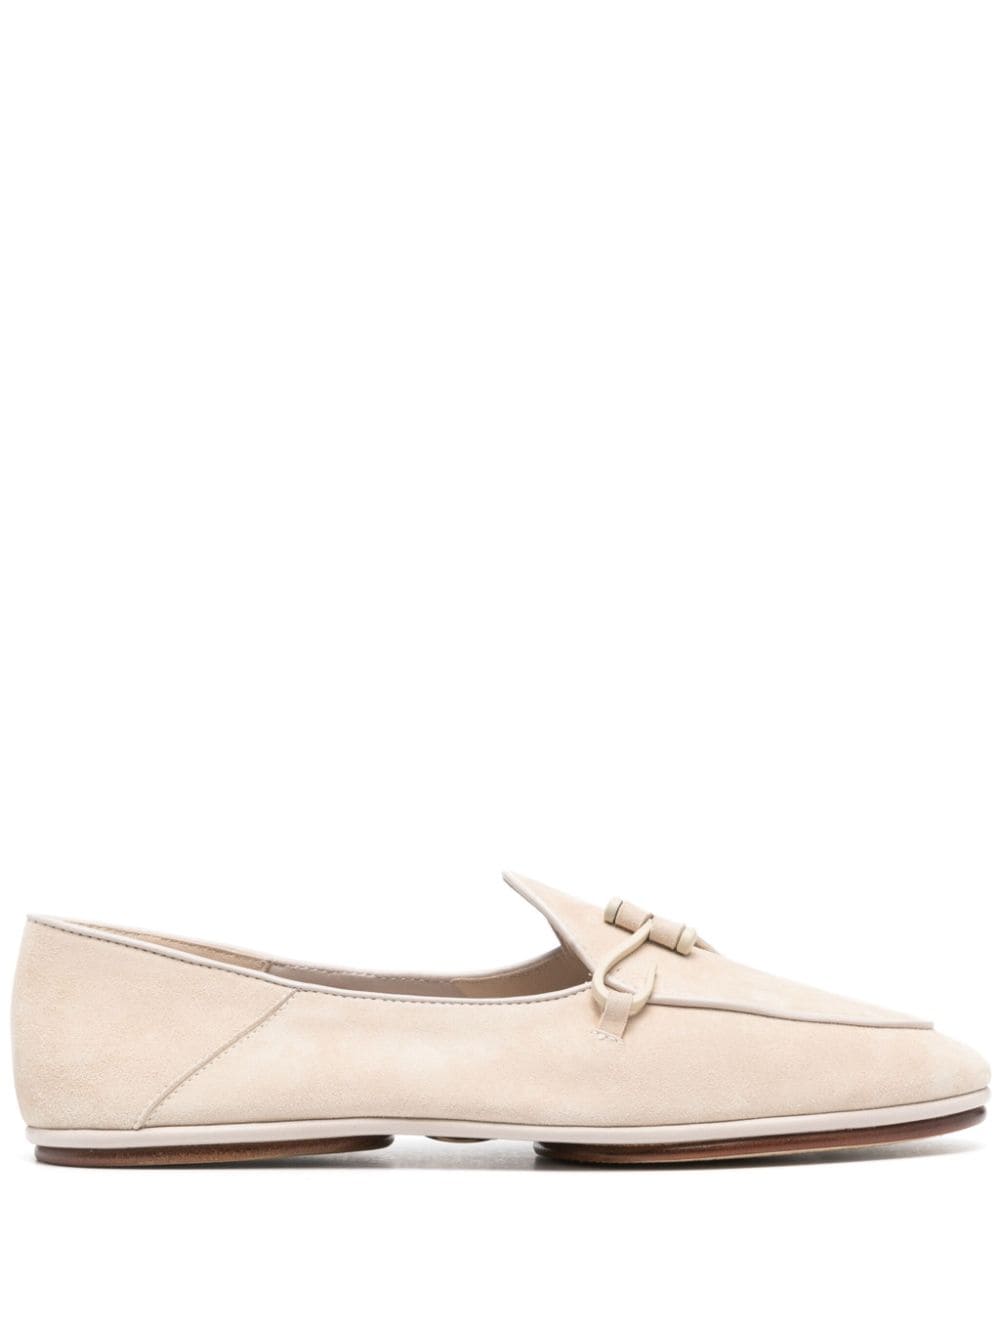 Image 1 of Edhen Milano Comporta Fly suede loafers